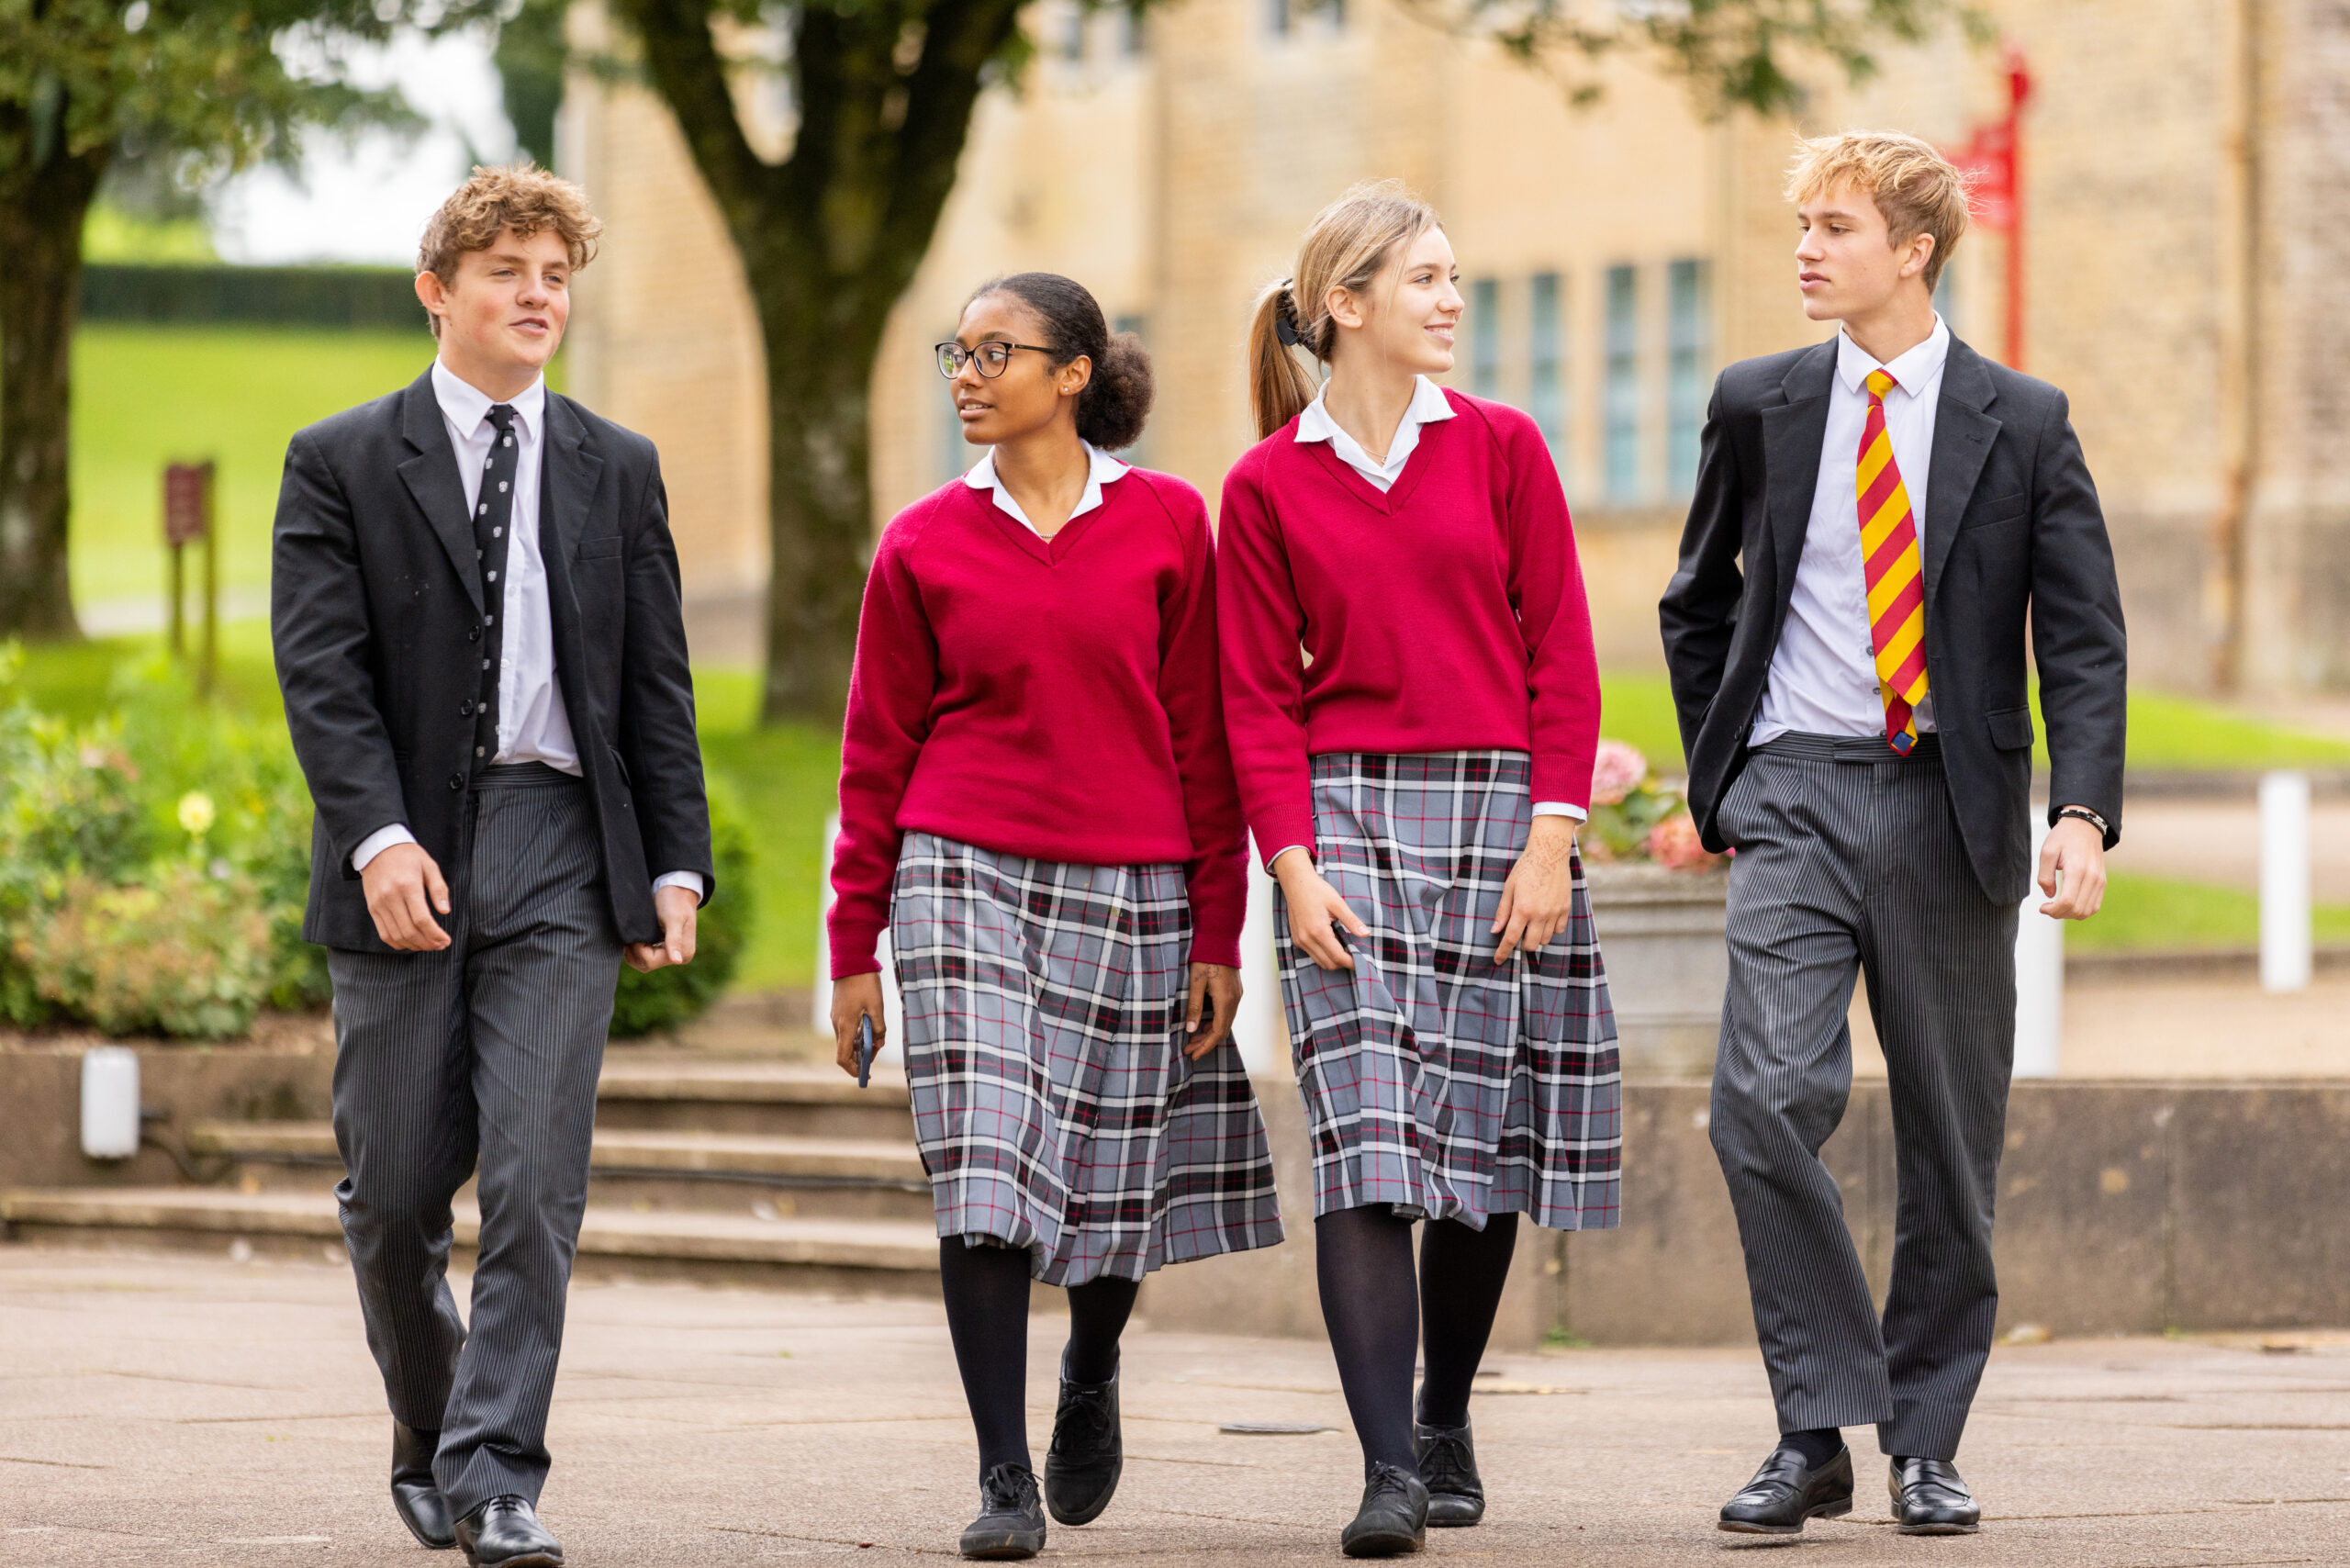 Downside: Catholic and Benedictine ethos ‘clearly evident’ in outstanding inspection